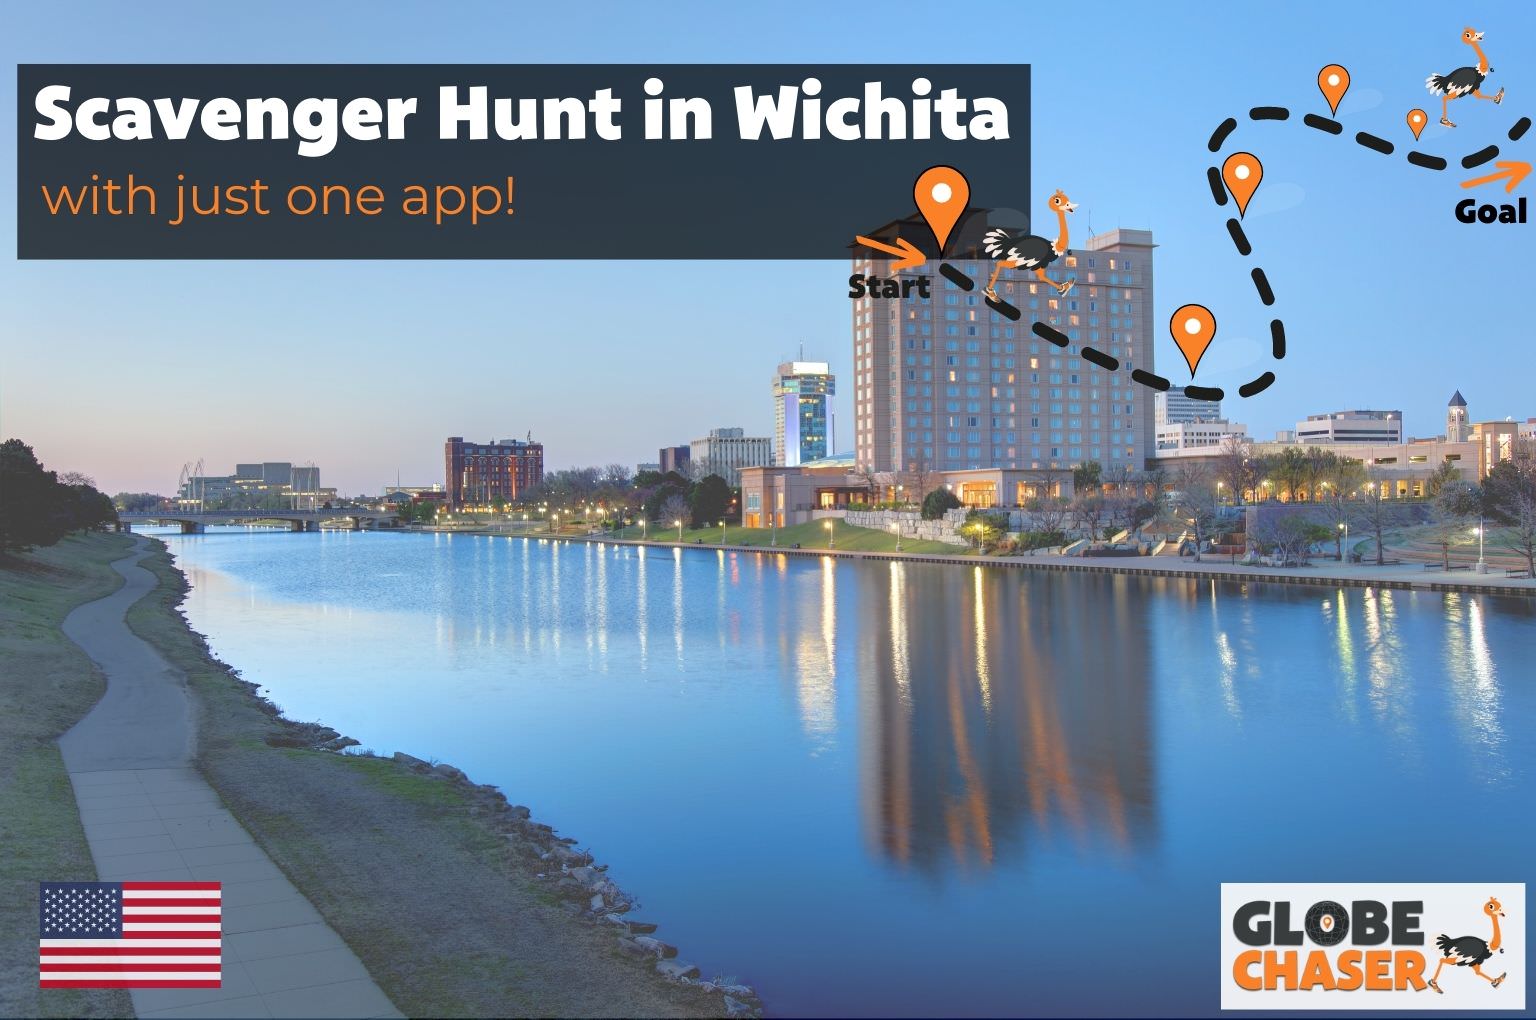 Scavenger Hunt in Wichita, USA - Family Activities with the Globe Chaser App for Outdoor Fun